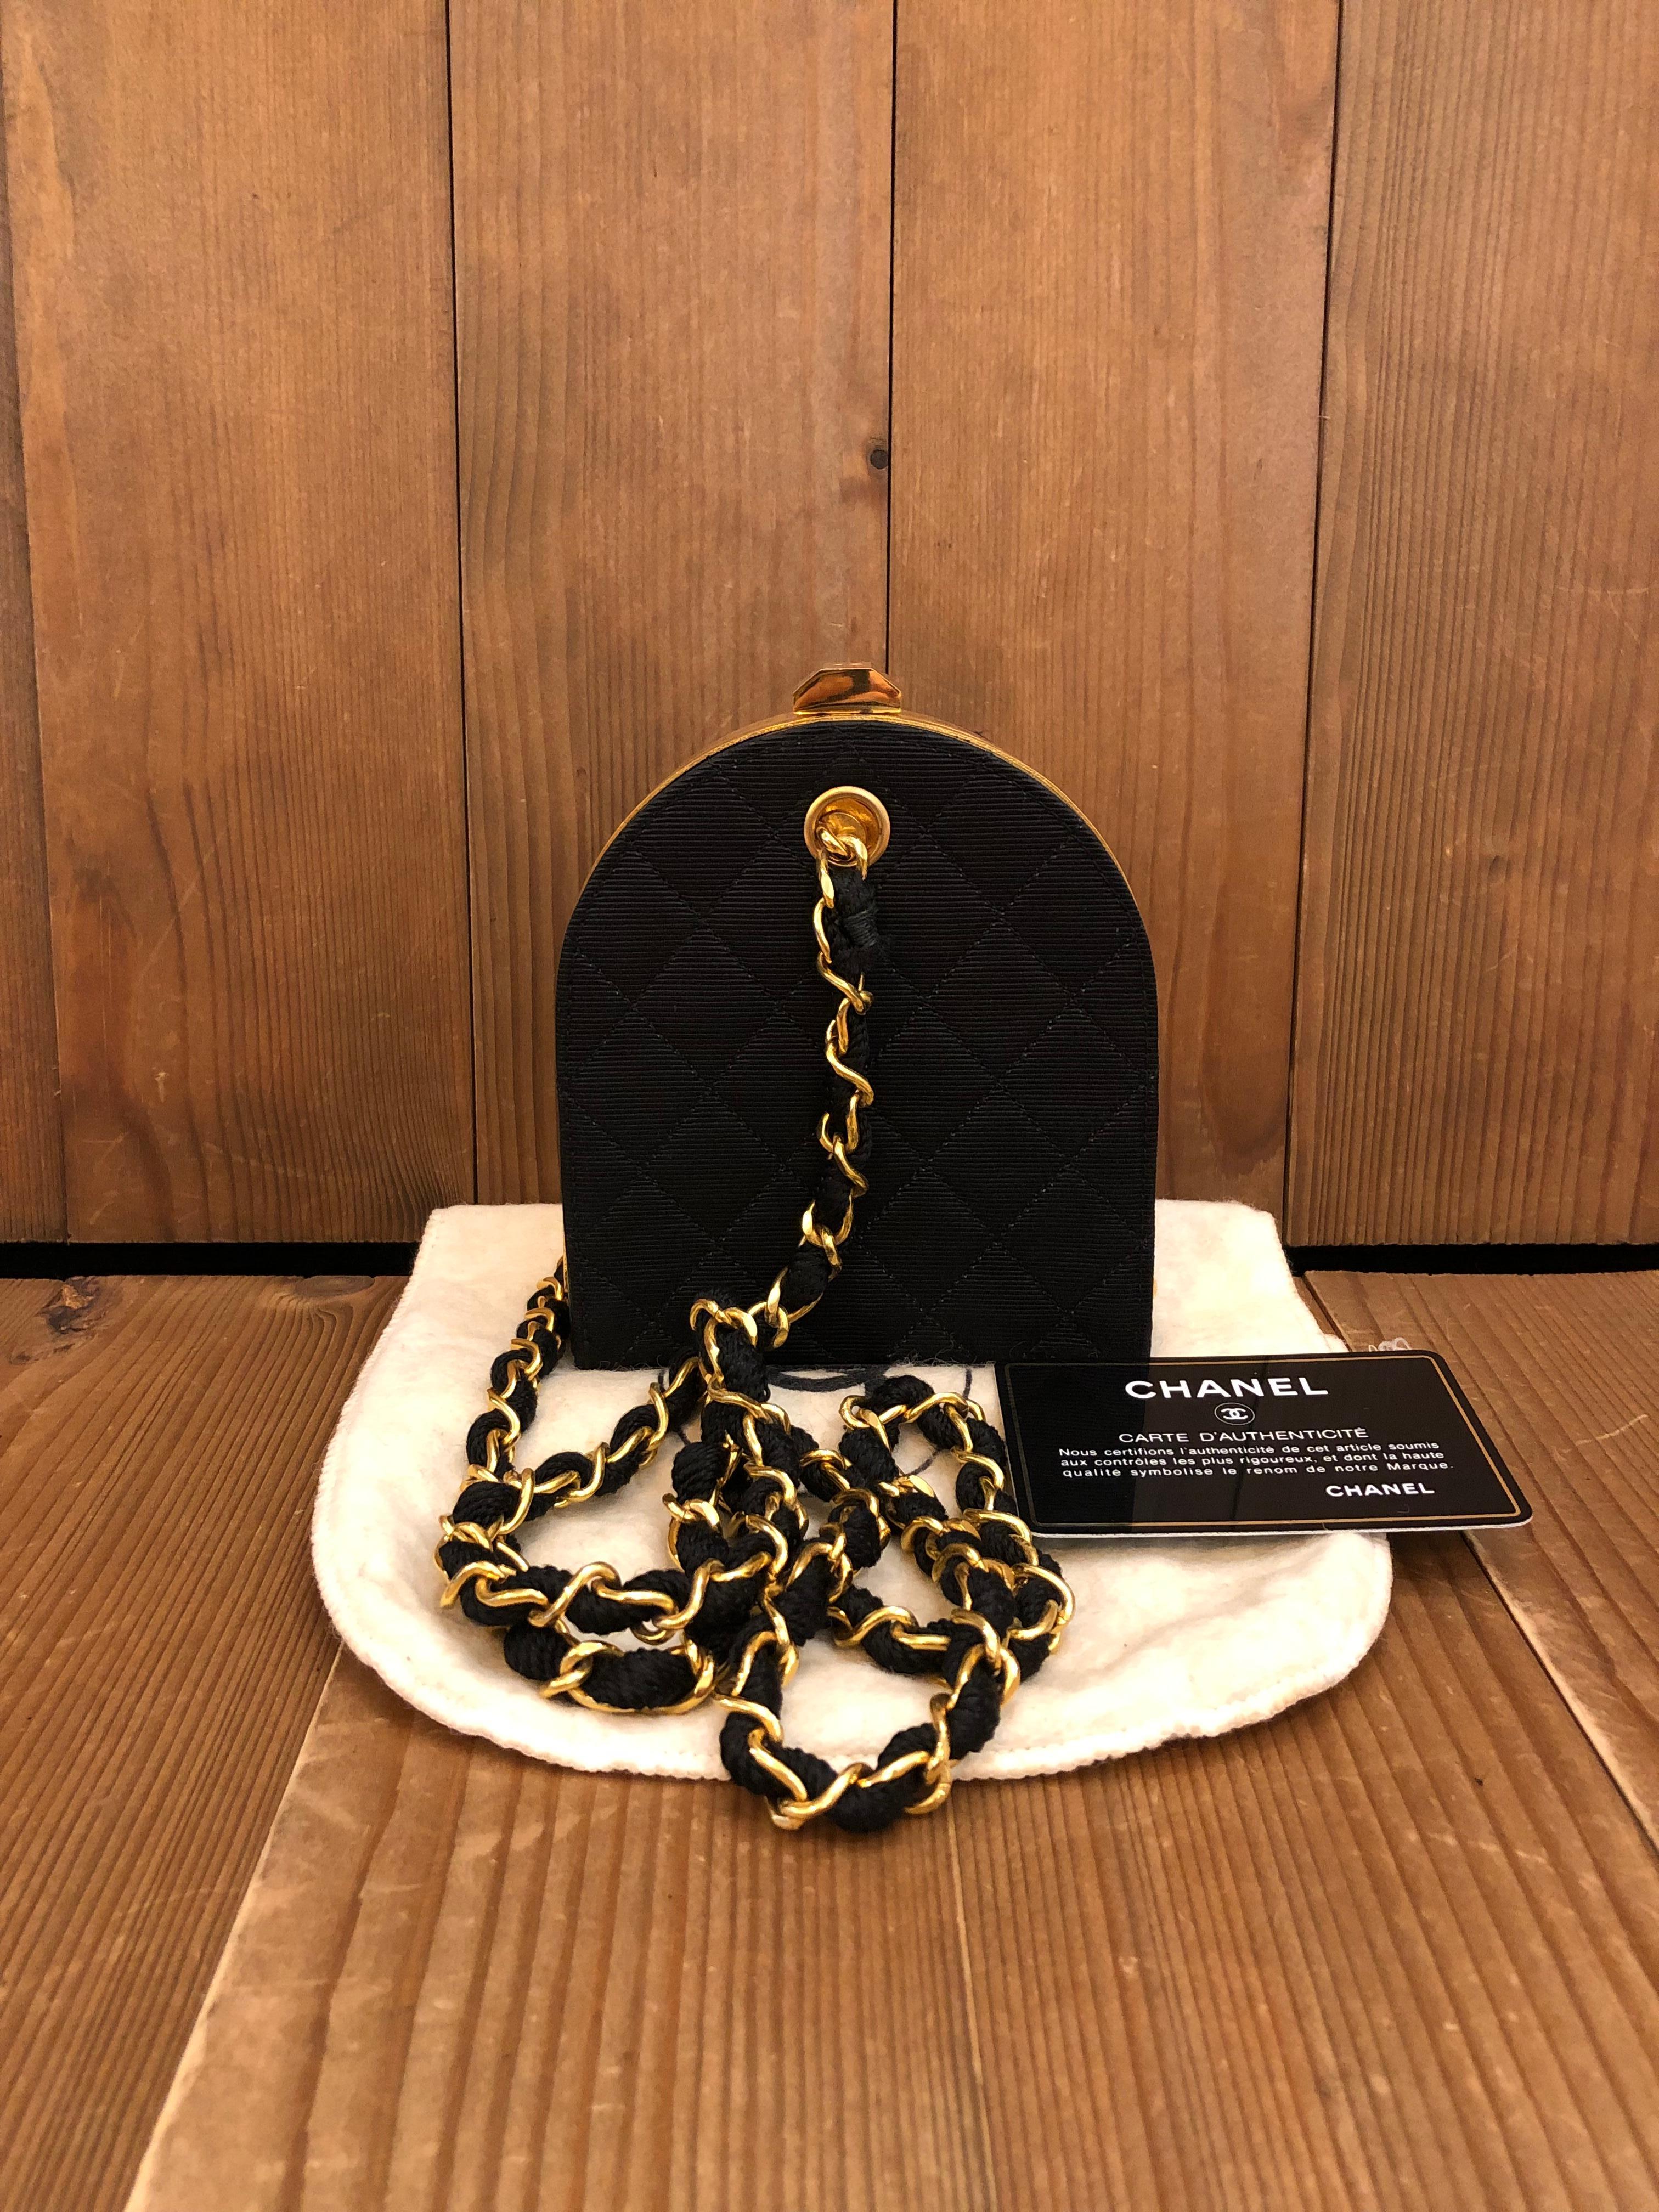 This vintage Chanel mini box clutch bag is crafted of diamond quilted canvas and lambskin leather in black with gold toned hardware. The clutch features gold toned chain interlaced with the same canvas. The bottom part of the clutch is lined with